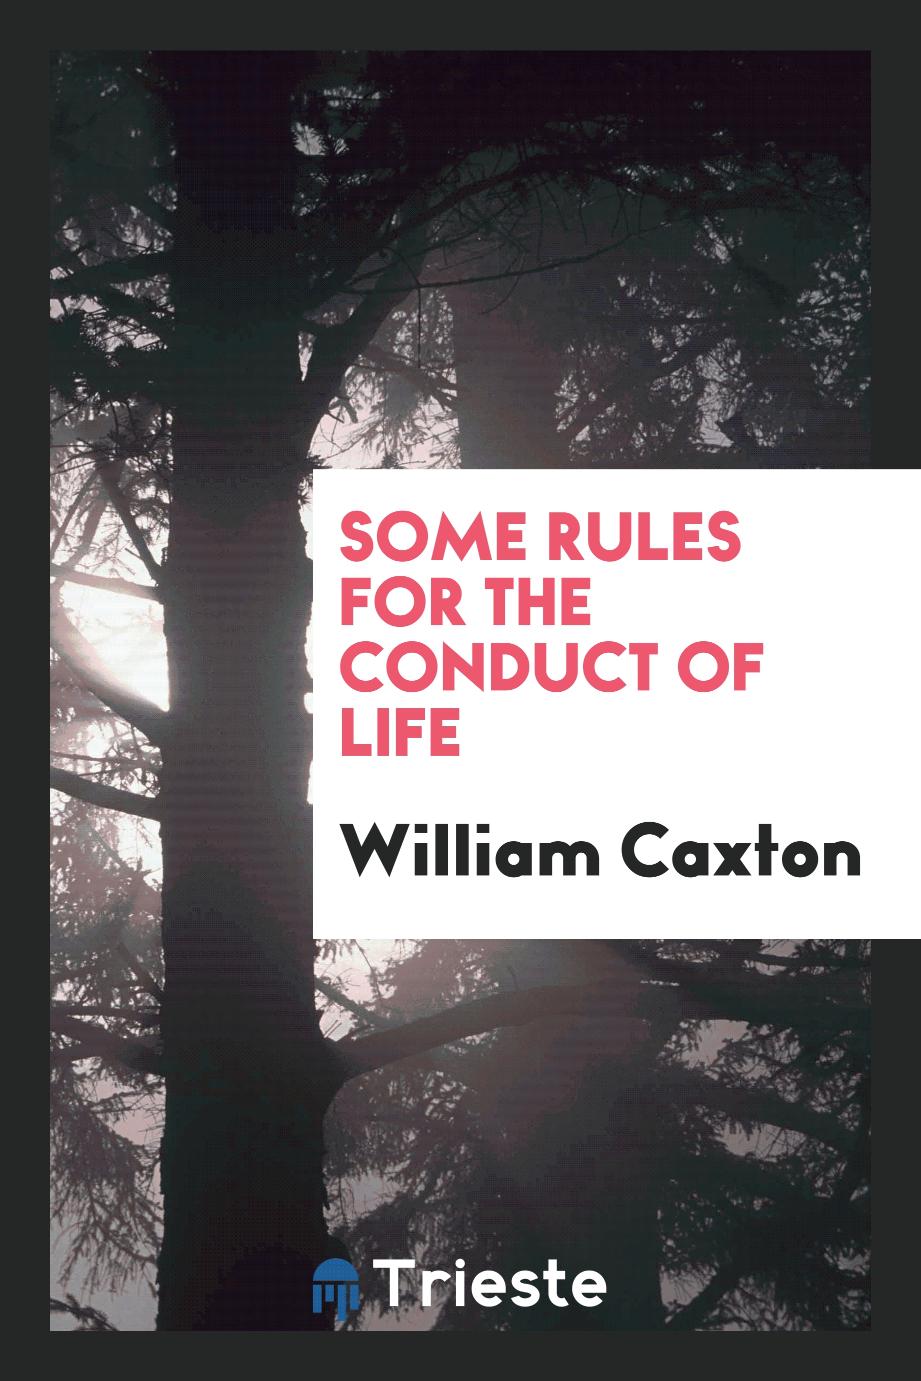 Some rules for the conduct of life